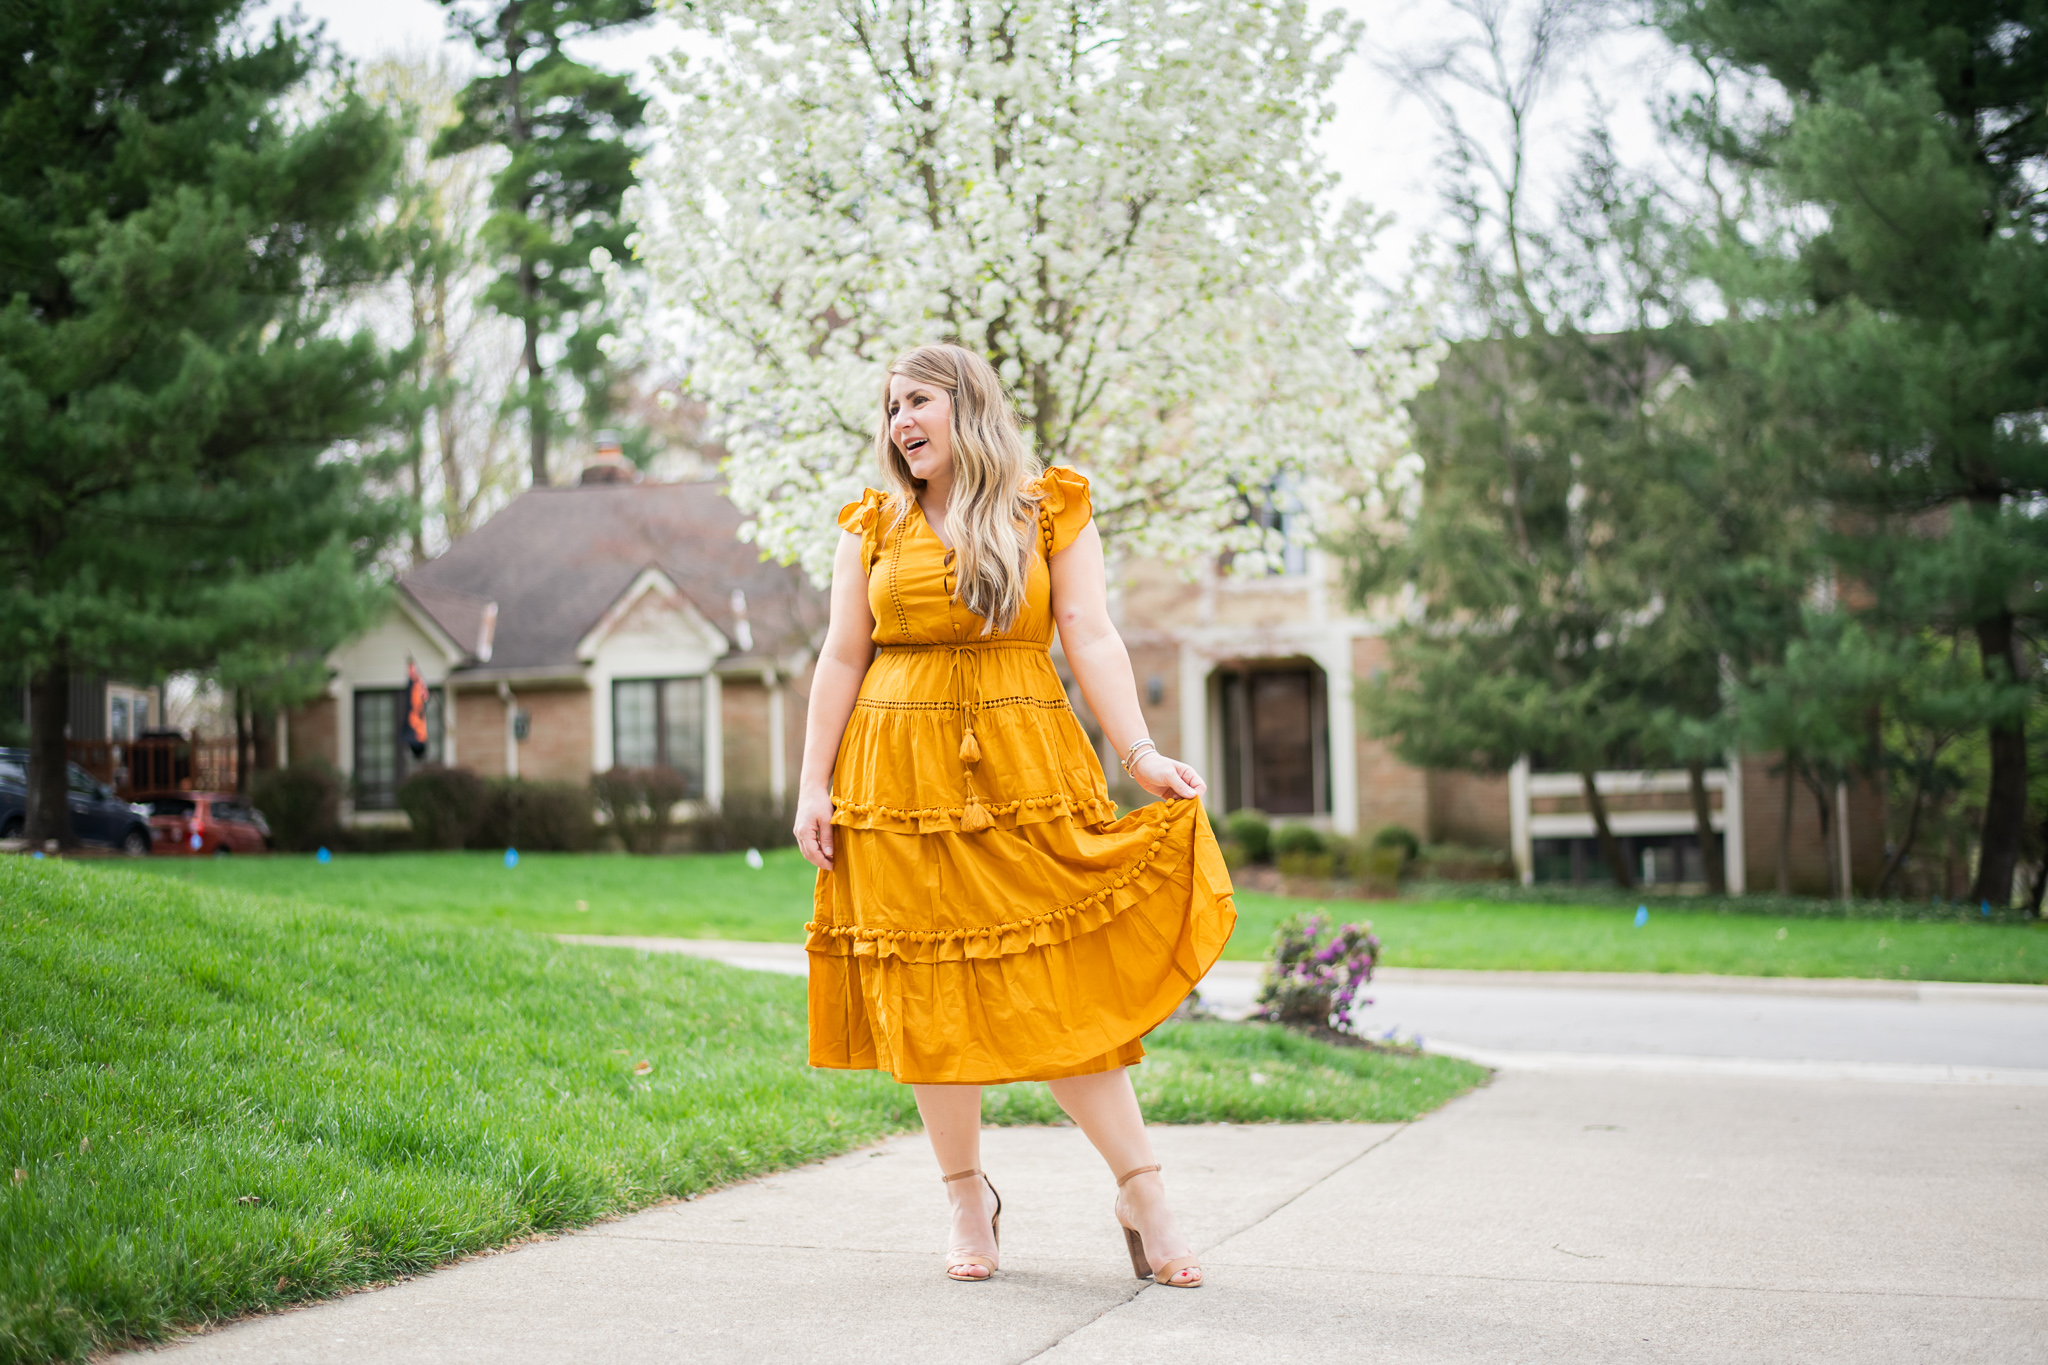 Summer Skin Care Tips with Cetaphil by popular North Carolina beauty blog, Coffee Beans and Bobby Pins: image of a woman wearing a mustard color dress and and standing outside by some trees with white blossoms on them.